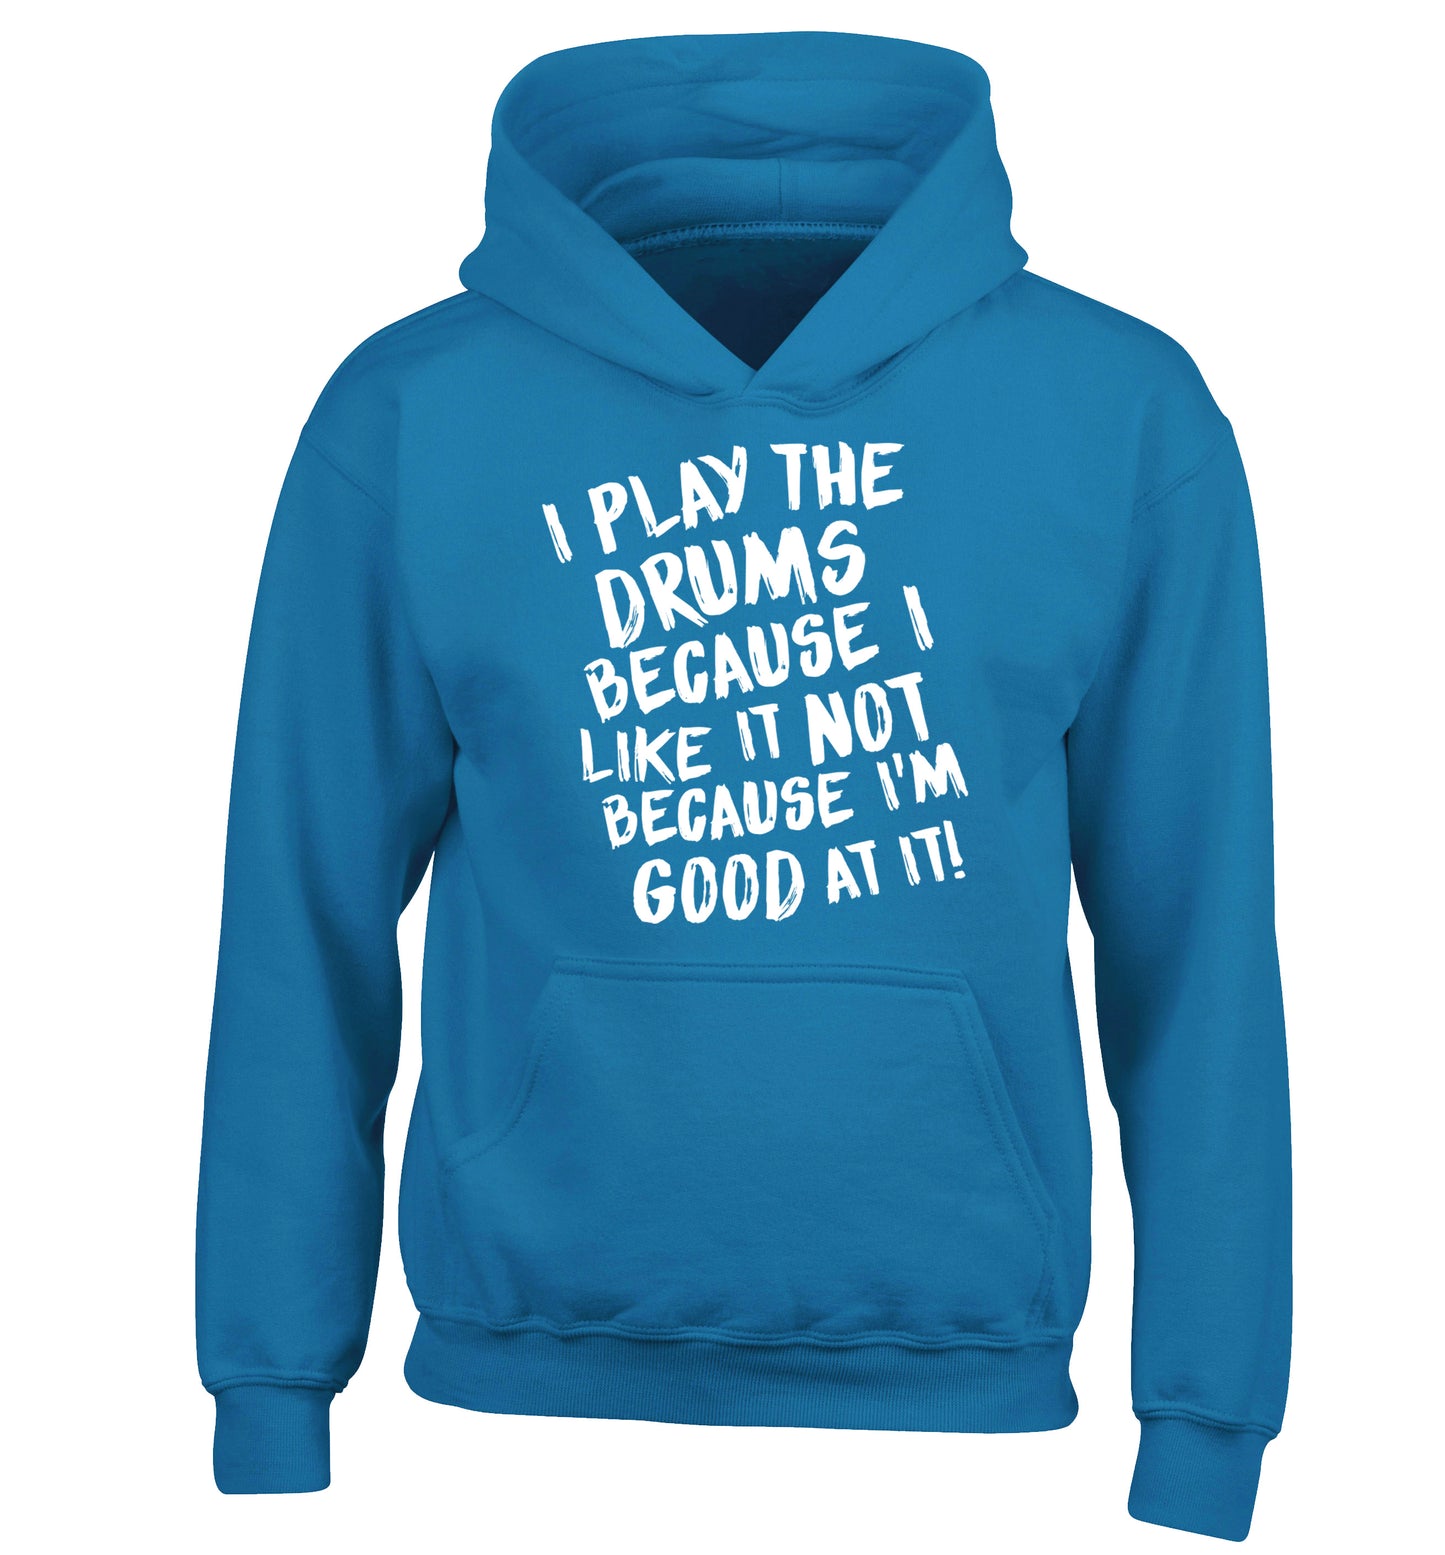 I play the drums because I like it not because I'm good at it children's blue hoodie 12-14 Years